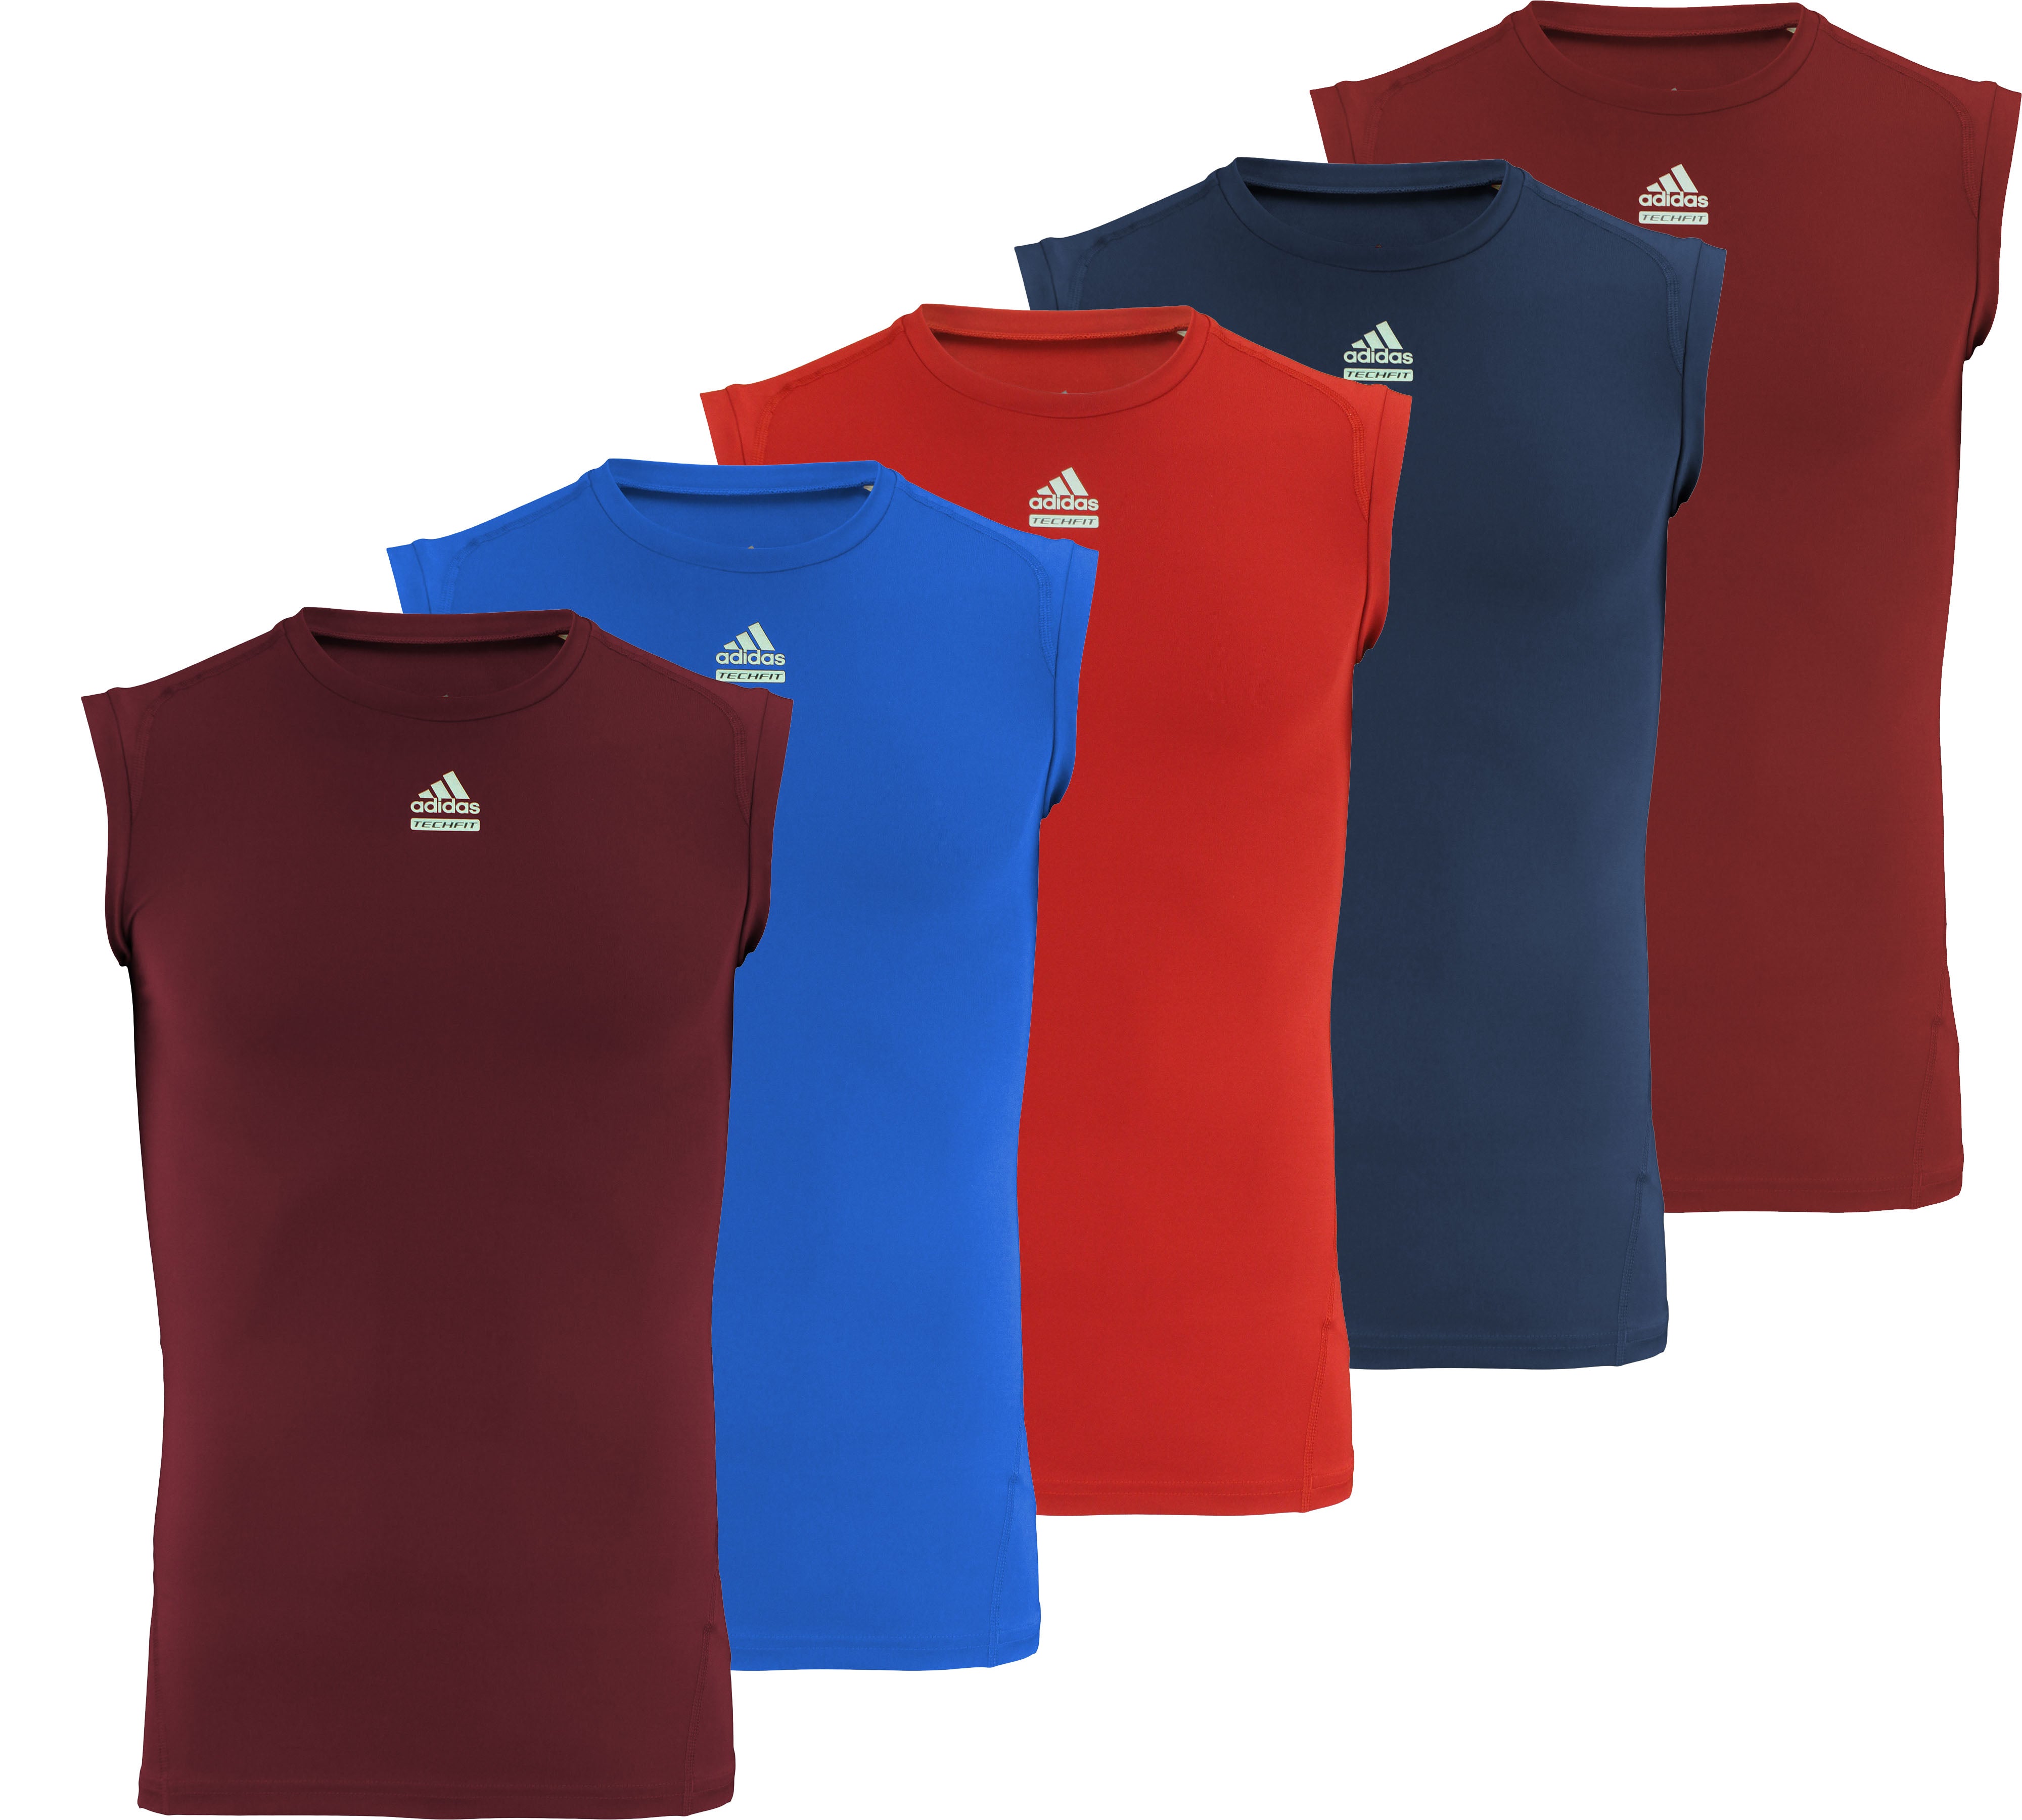 adidas TechFit Compression Short Sleeve ClimaLite Underlayer - Red